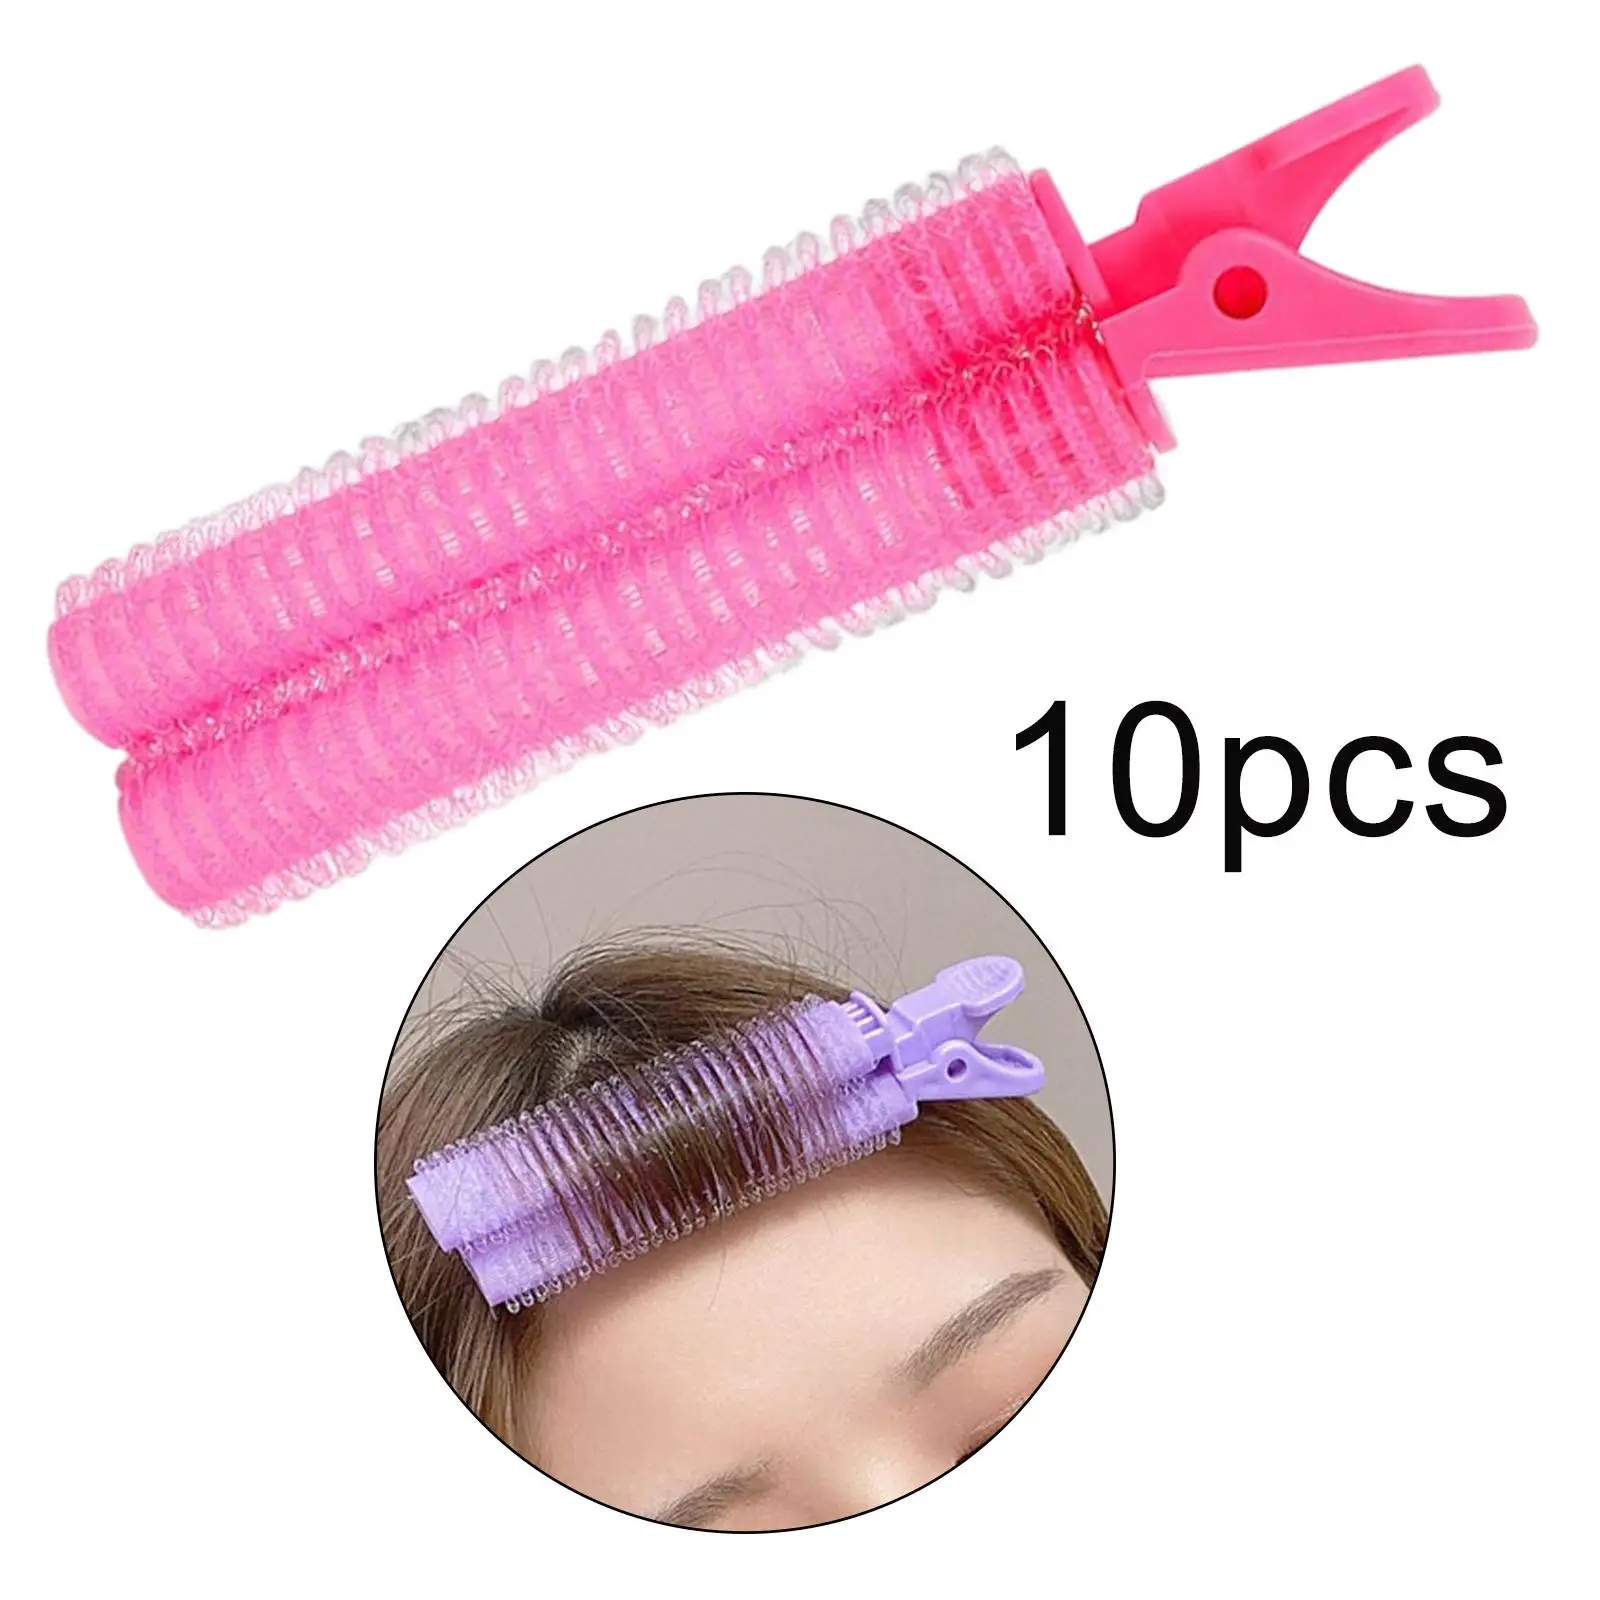 10Pcs Hair Bangs Curling Clips Comfortable Reusable Hair Curler for DIY Hair Styling Hair Bangs Girls Lazy People Hair Clips